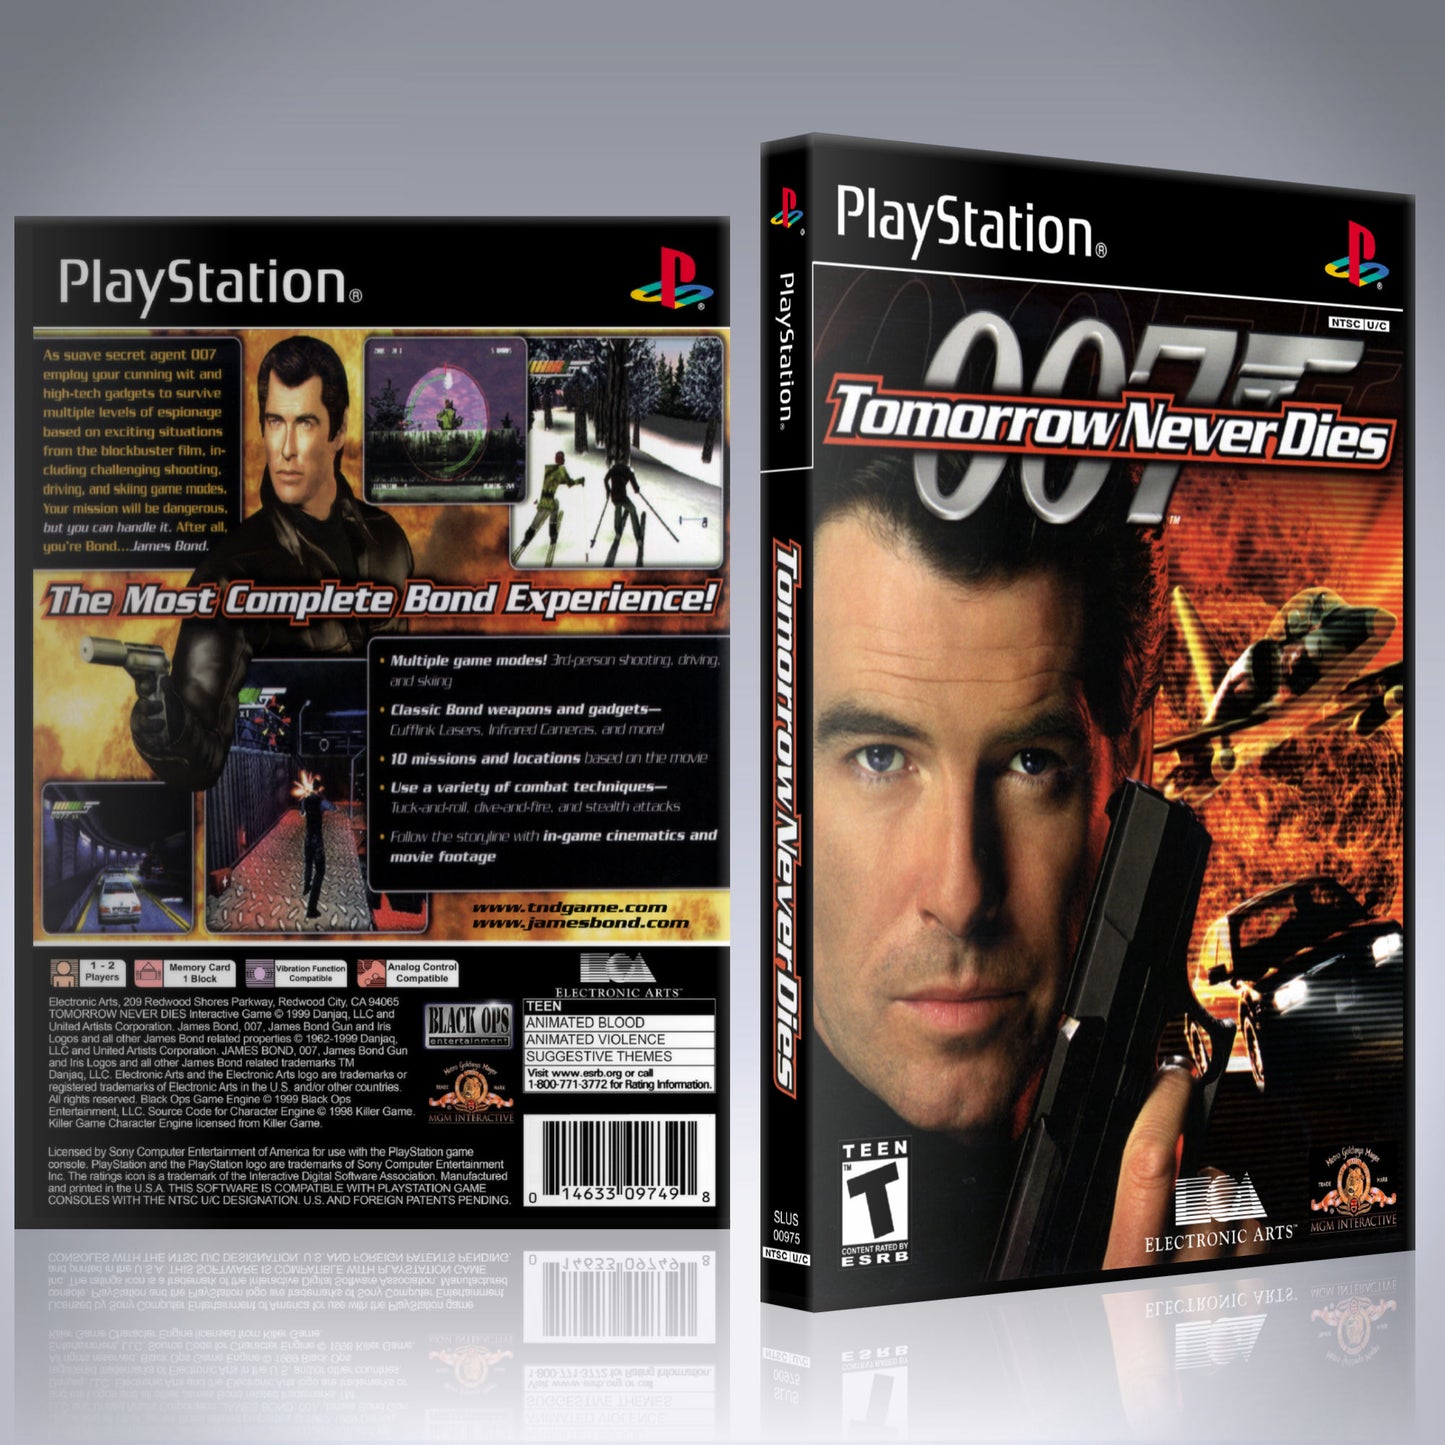 PS1 Case - NO GAME - 007 Tomorrow Never Dies